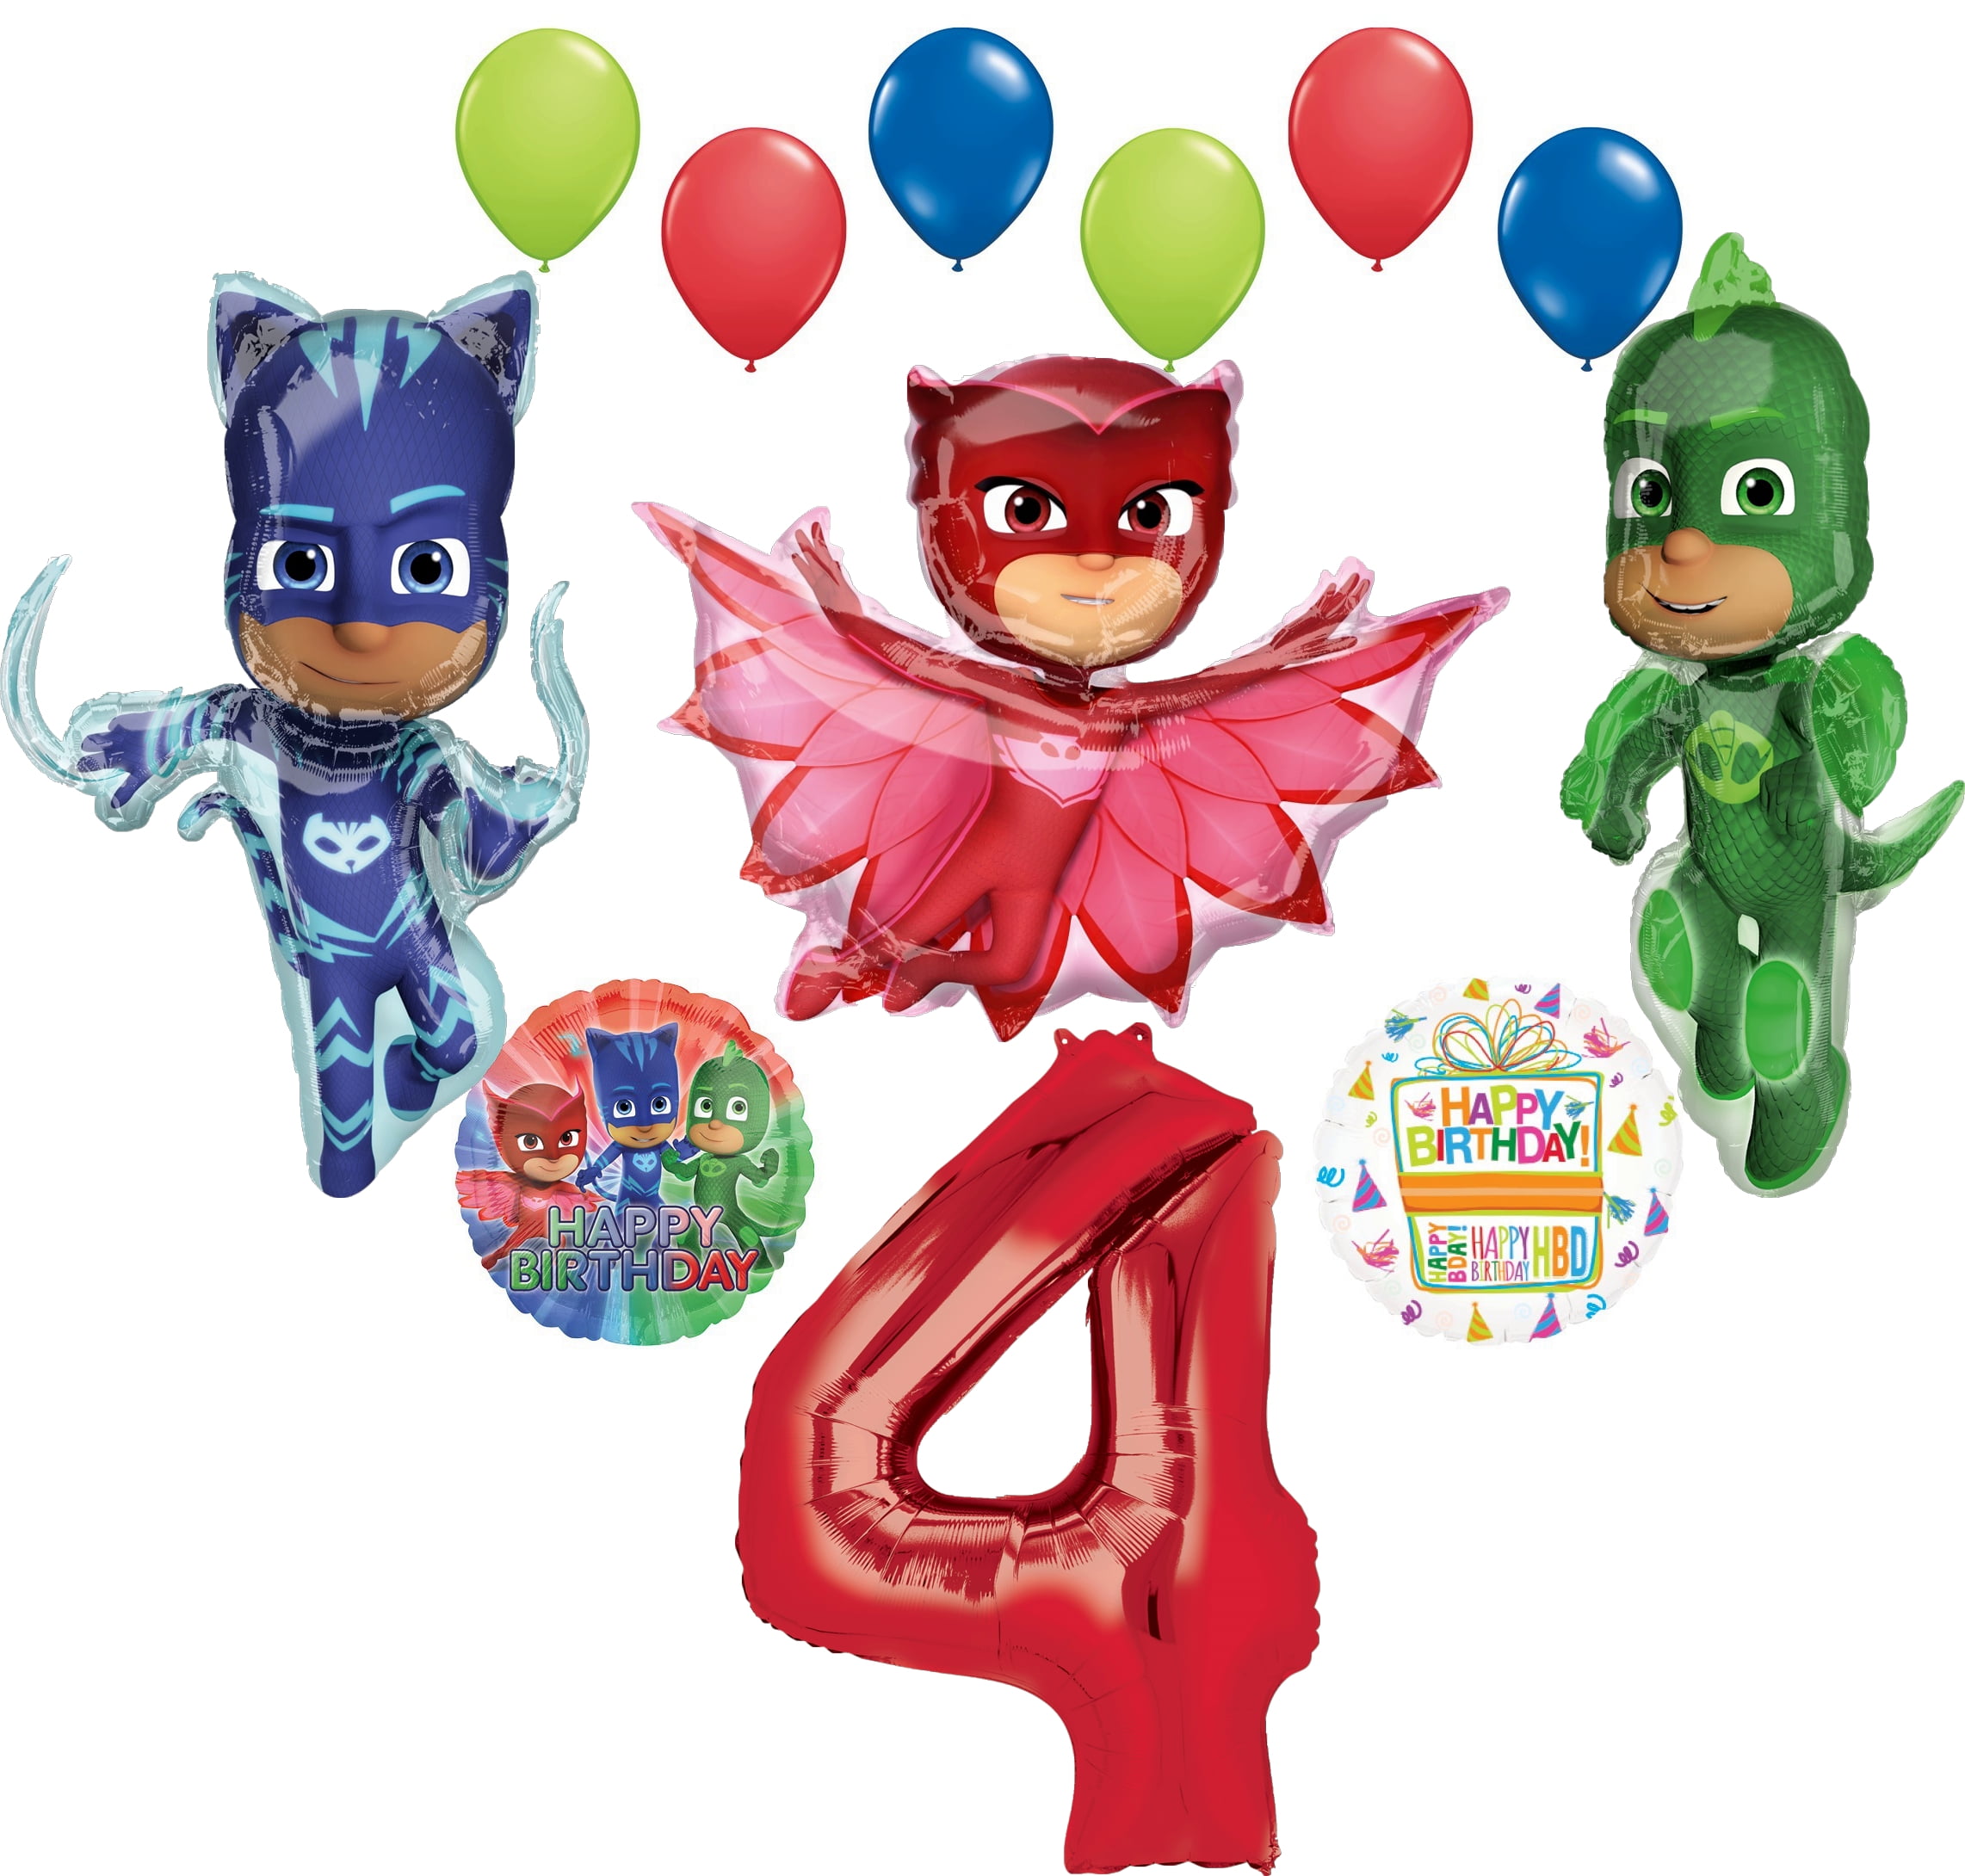 Mayflower Products PJ Masks Owlette 4th Birthday Party Supplies Balloon Bouquet 